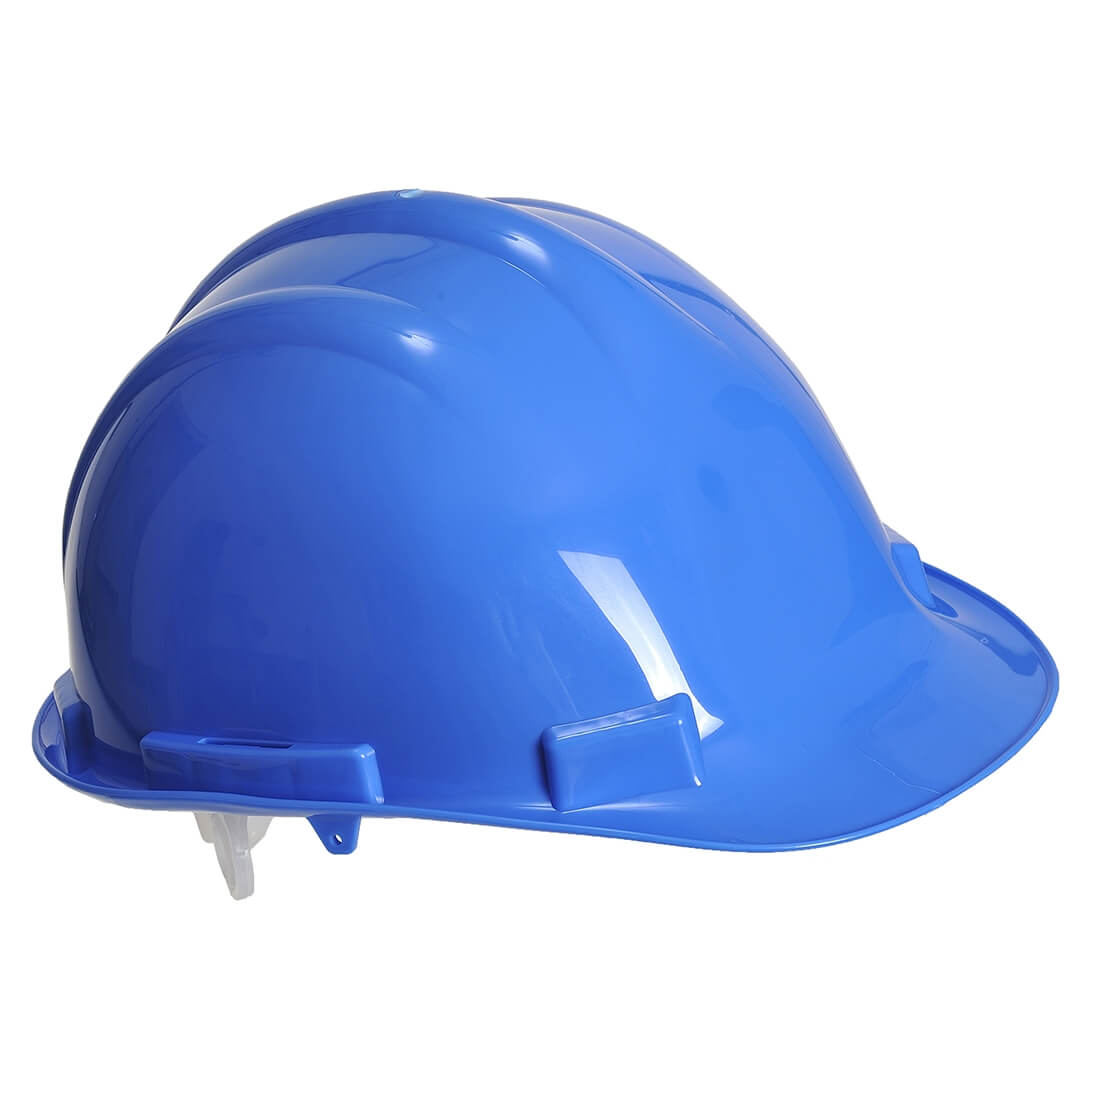 Endurance Safety Helmet - PP - Personal protection